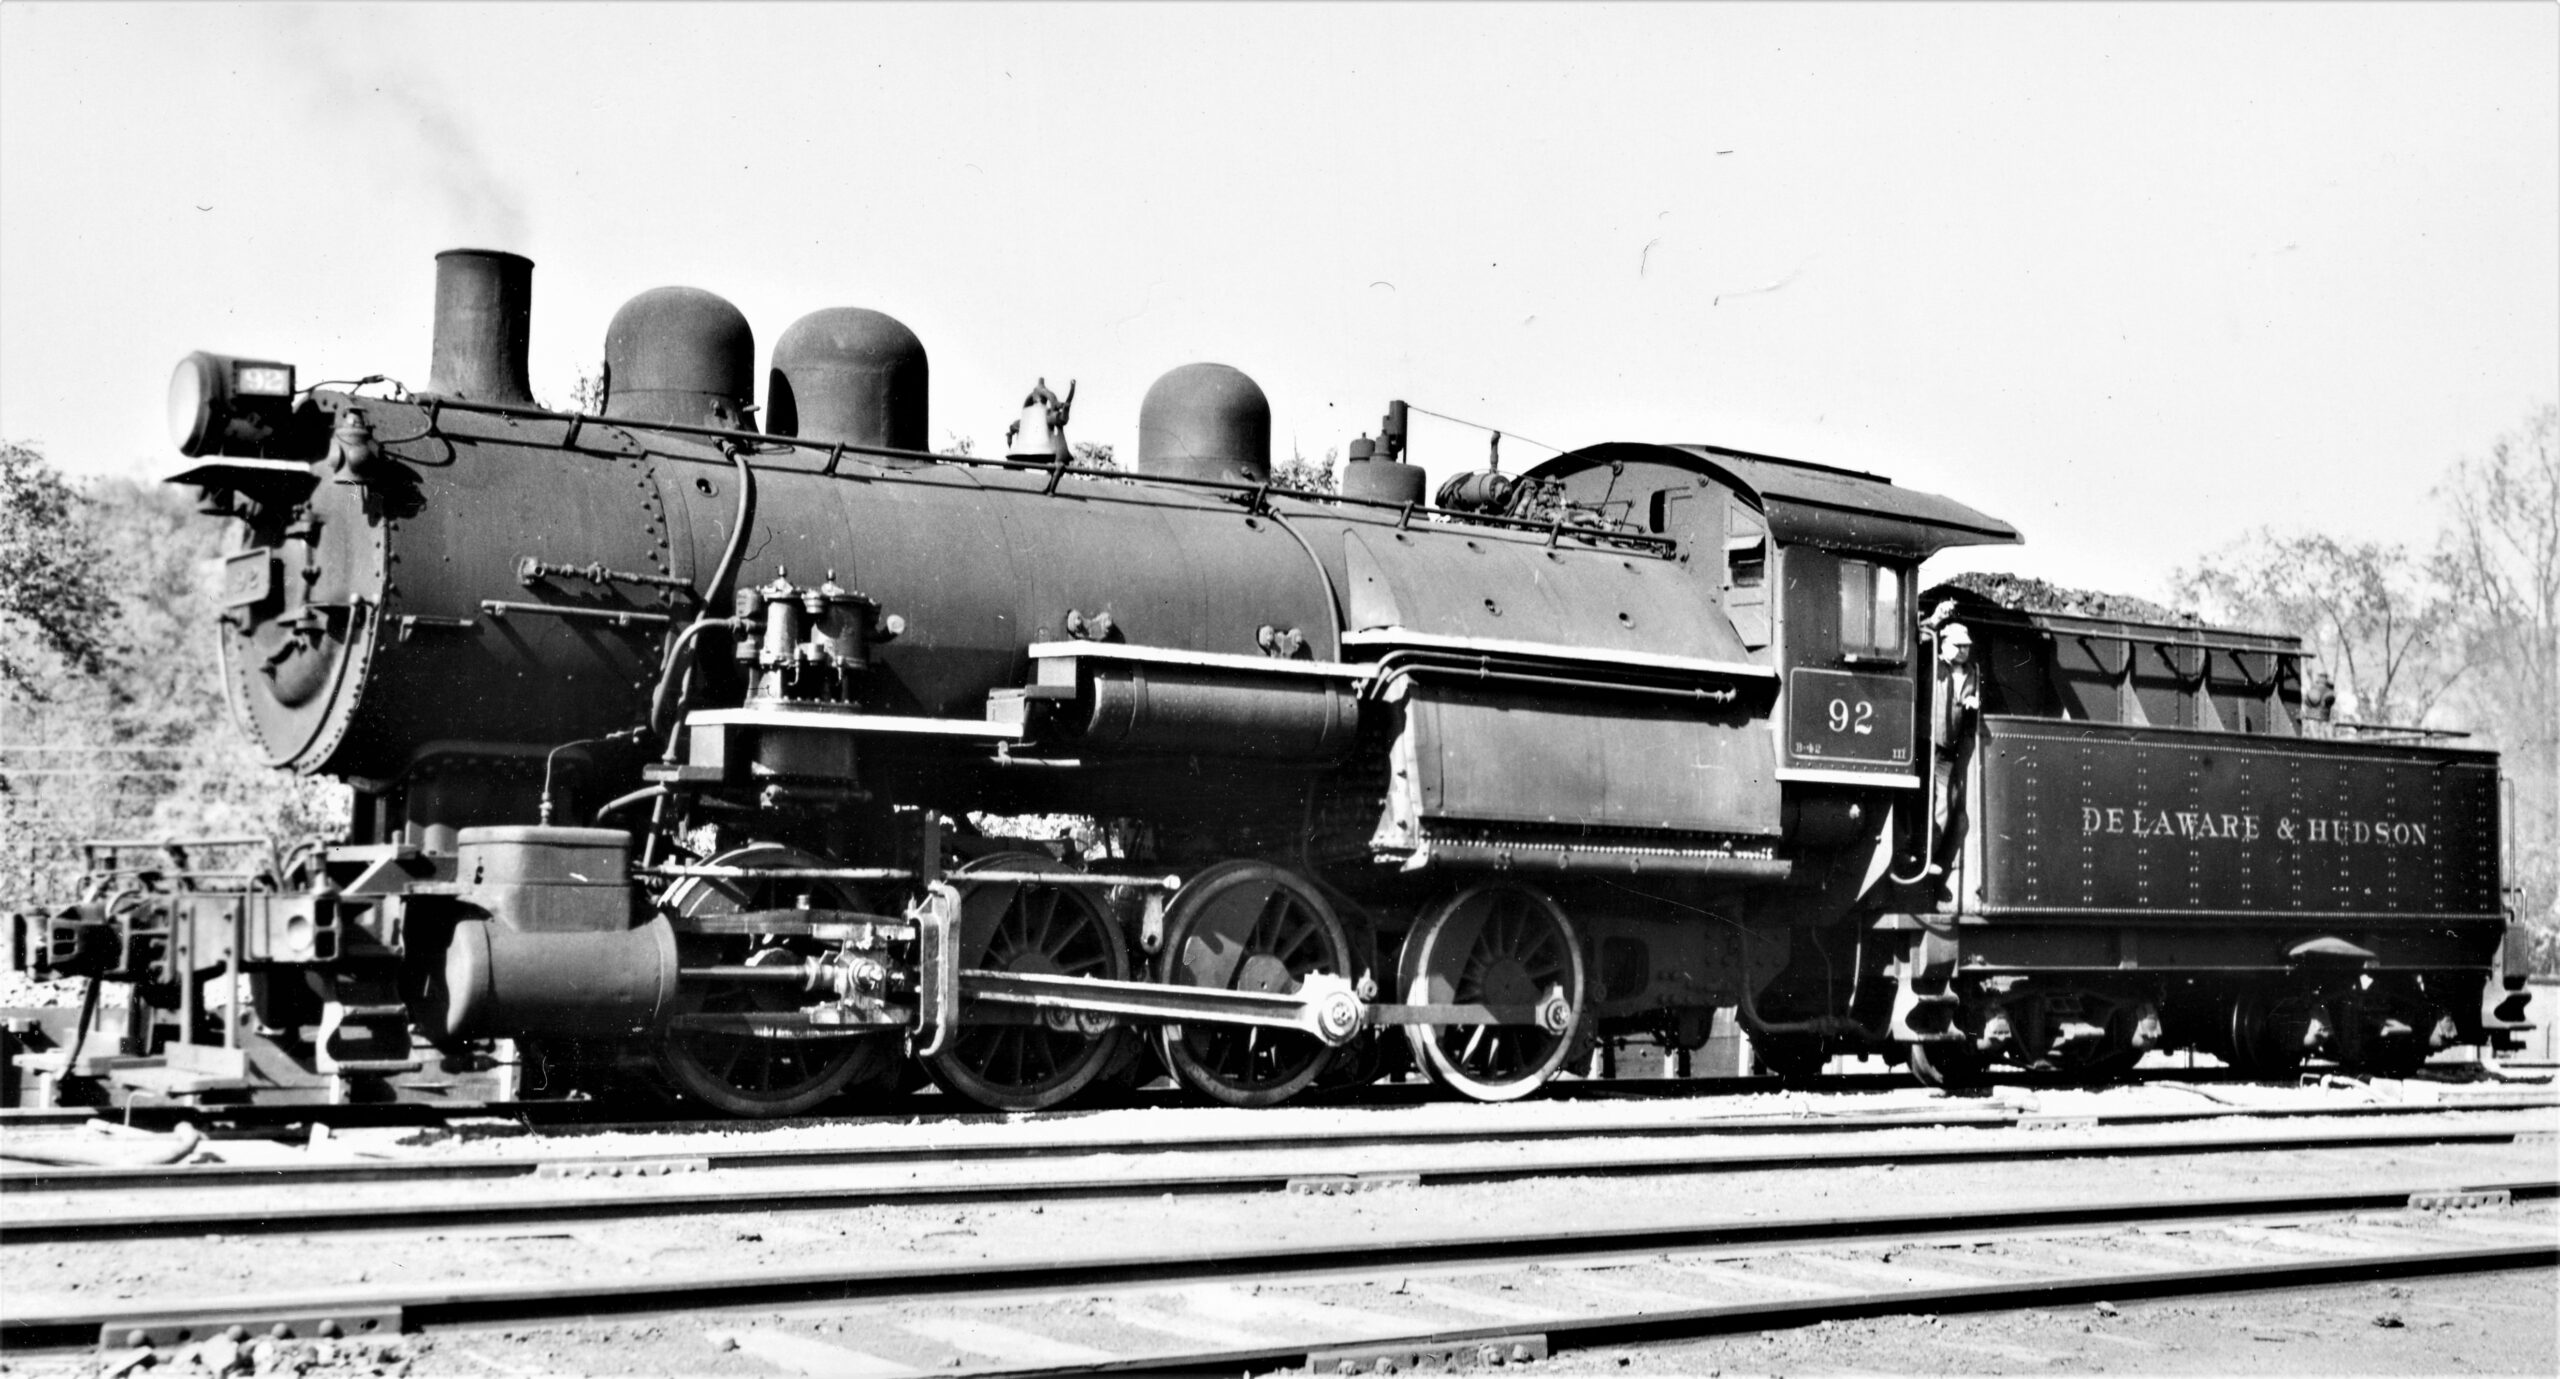 Delaware and Hudson | Mechanicville, New York | B-6 class 0-8-0 #92 | May 22, 1938